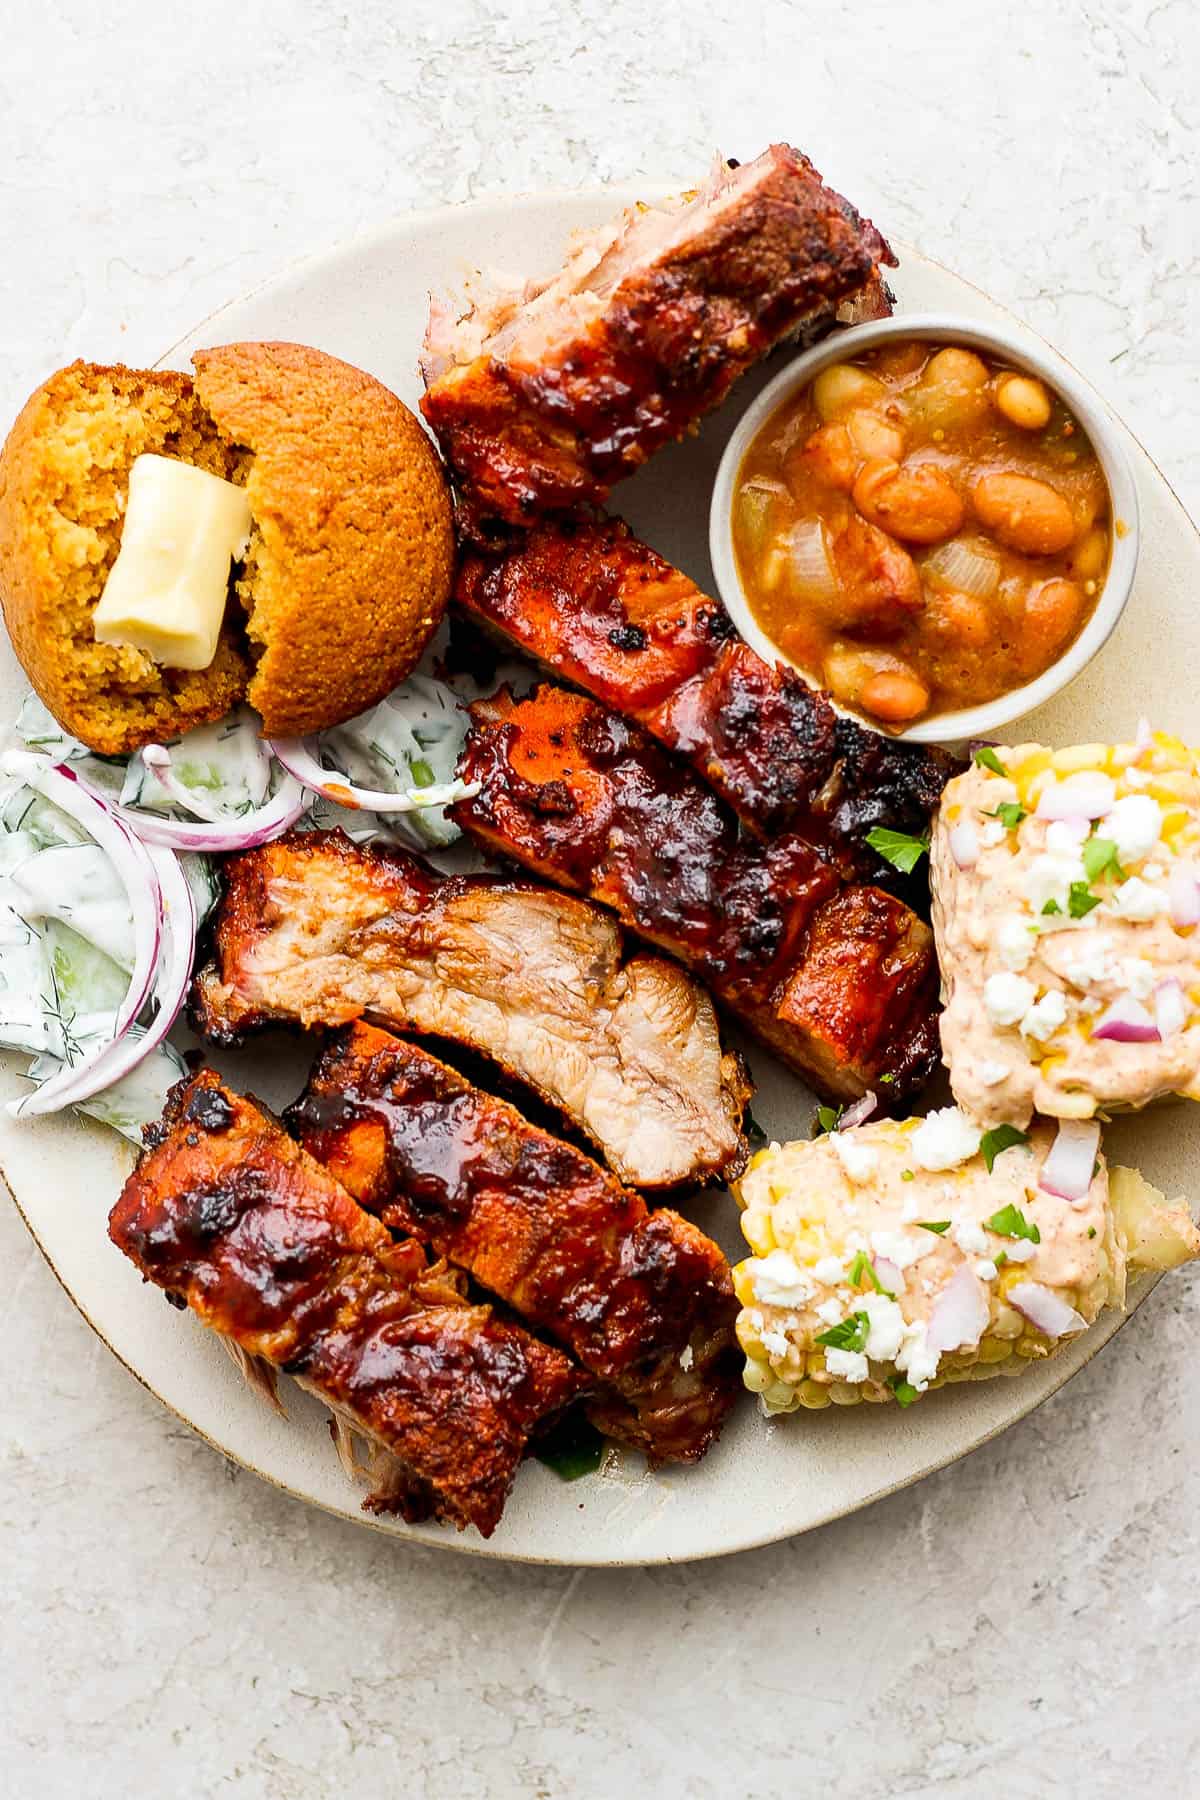 A plate full of grilled ribs, slow cooker baked beans, creamy cucumber salad, Mexican street corn salad, and a cornbread muffin.